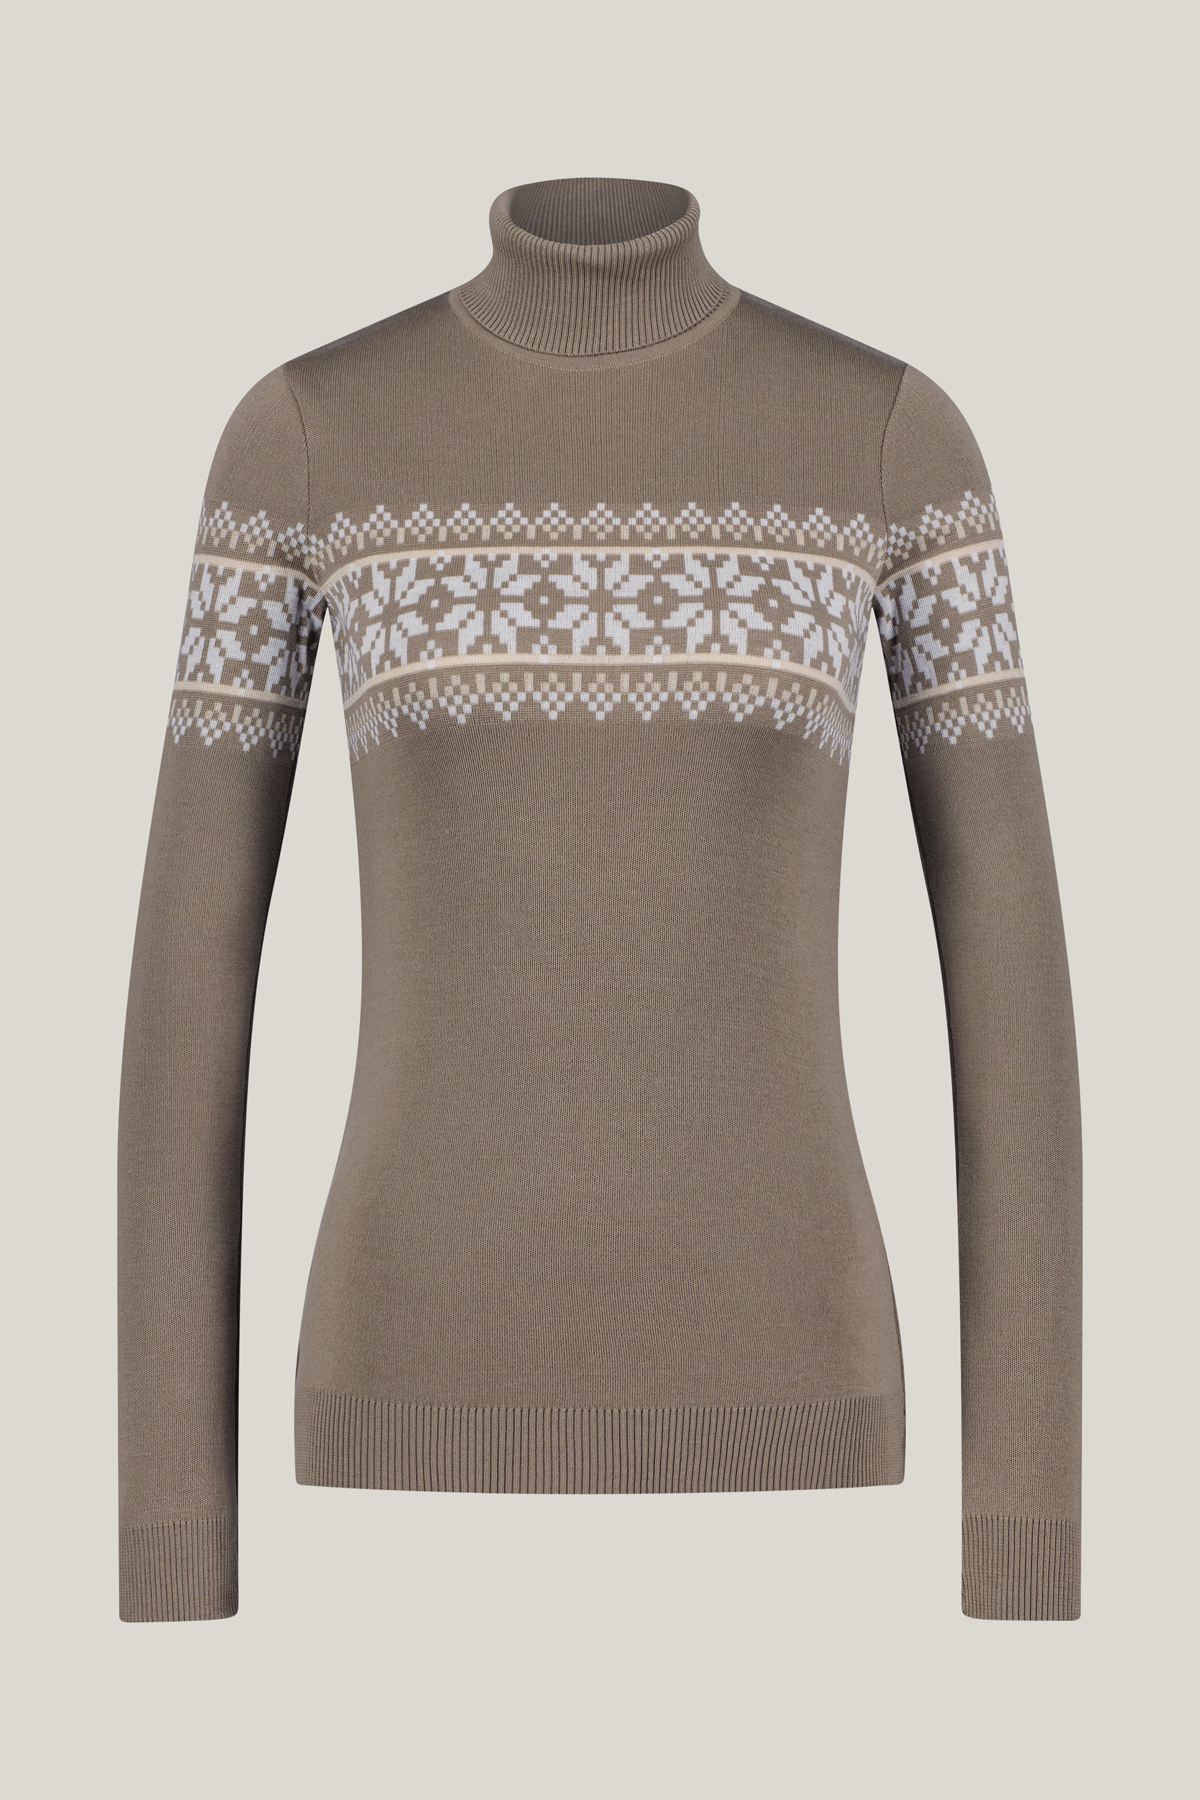 Turtleneck sweater Liv in beige made of Merino and Tencel from Tidløs